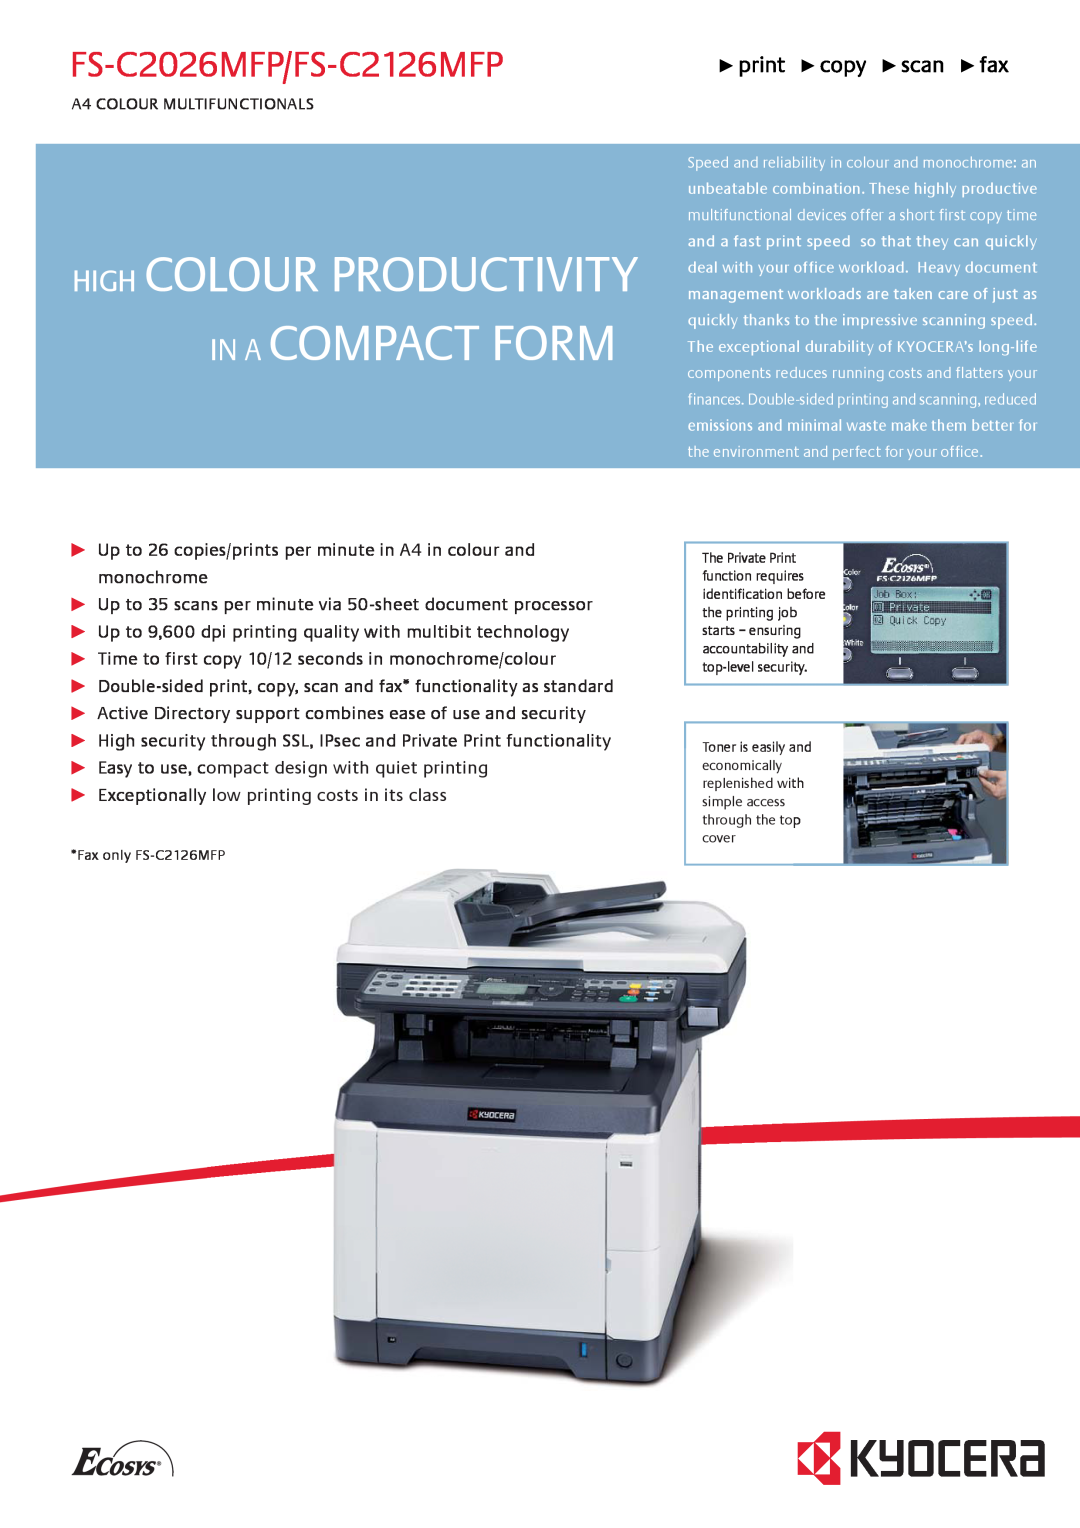 Kyocera manual High Colour Productivity In A Compact Form, FS-C2026MFP/FS-C2126MFP 